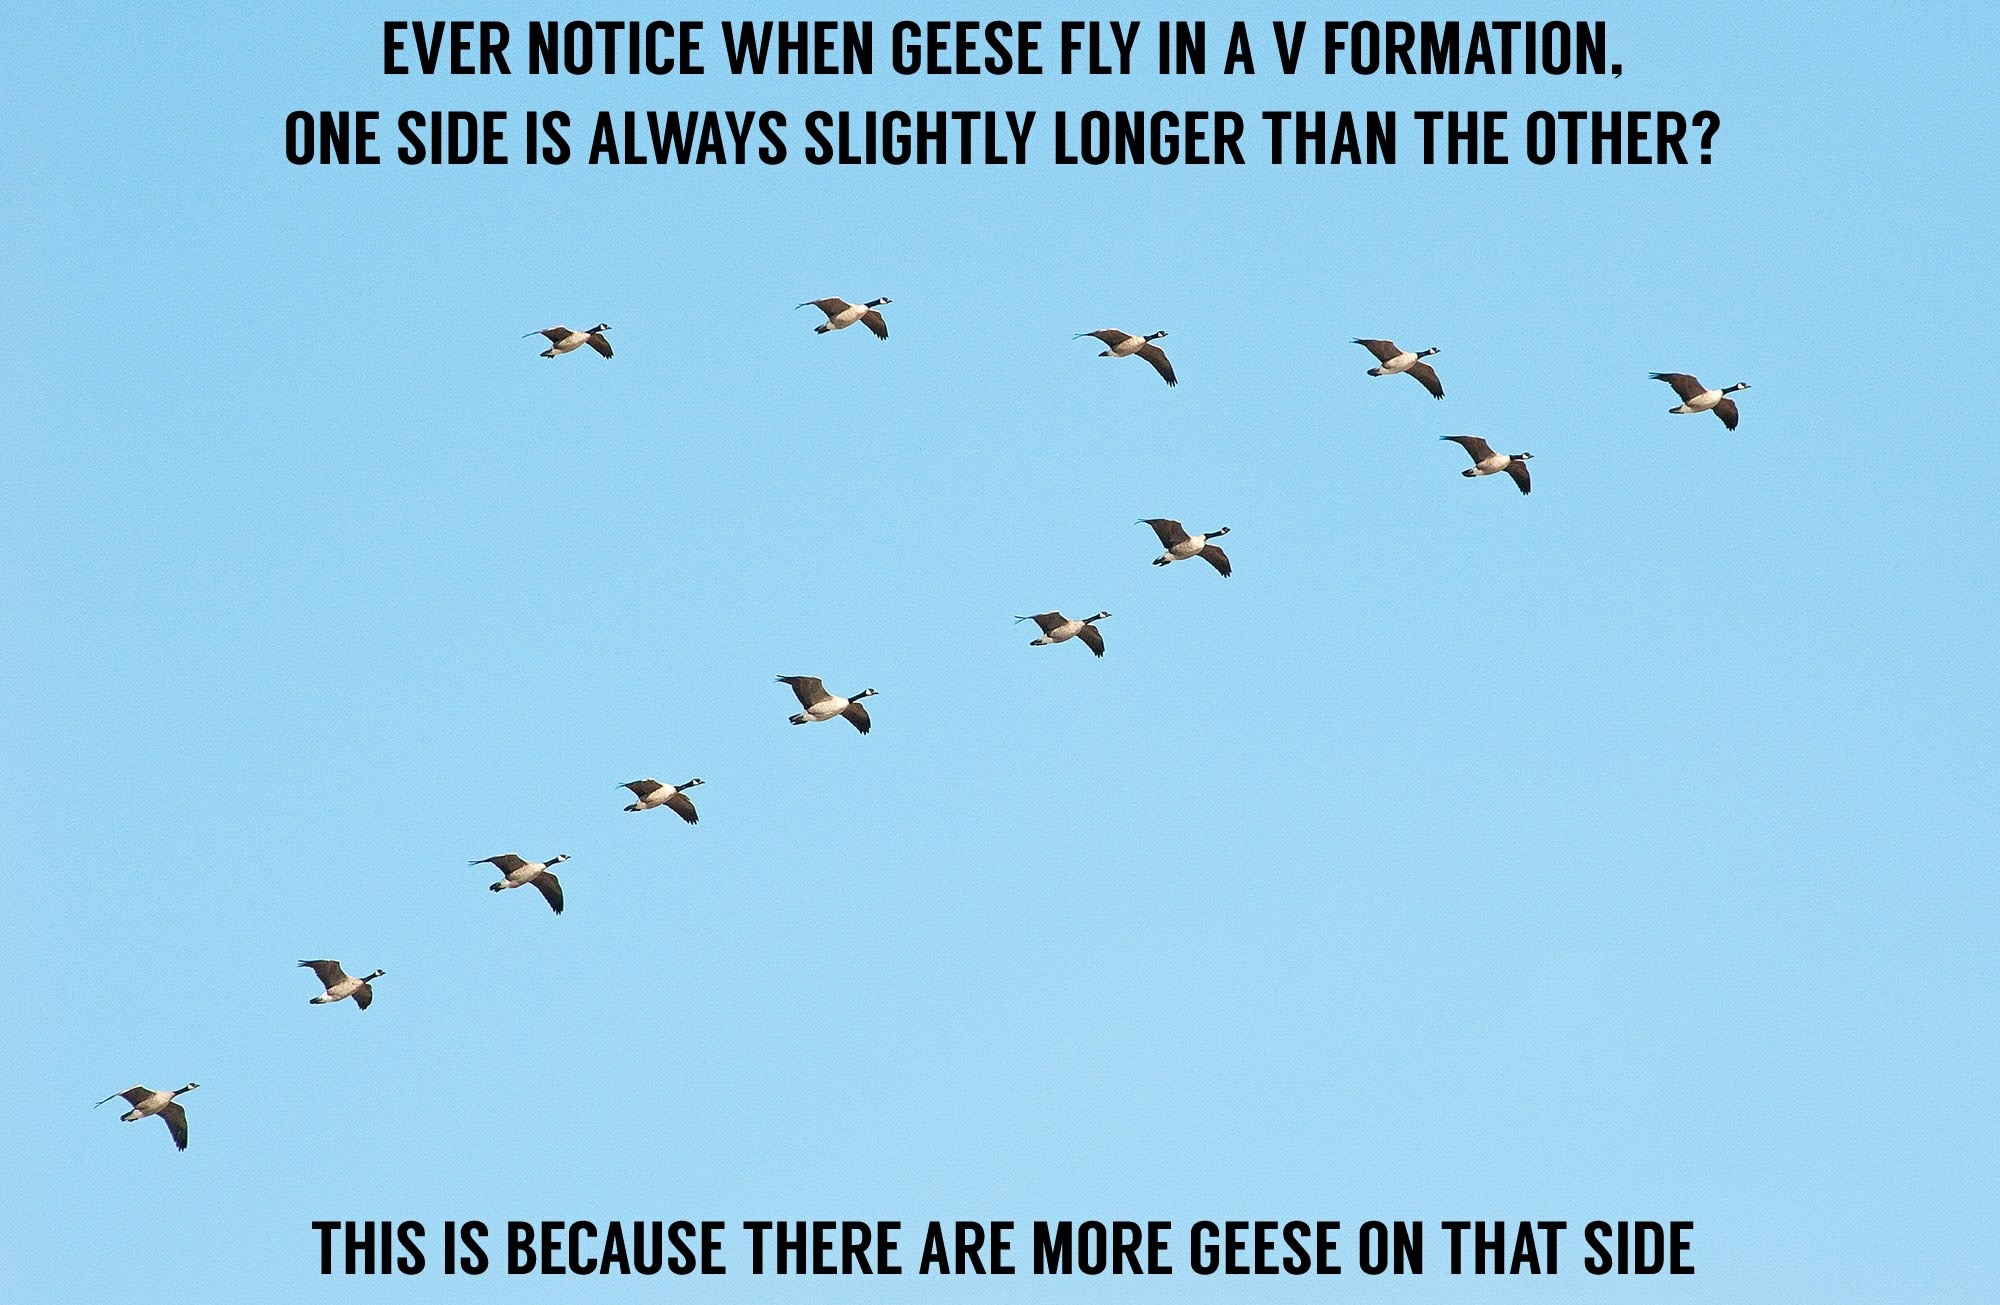 sky - Ever Notice When Geese Fly In A V Formation. One Side Is Always Slightly Longer Than The Other? This Is Because There Are More Geese On That Side